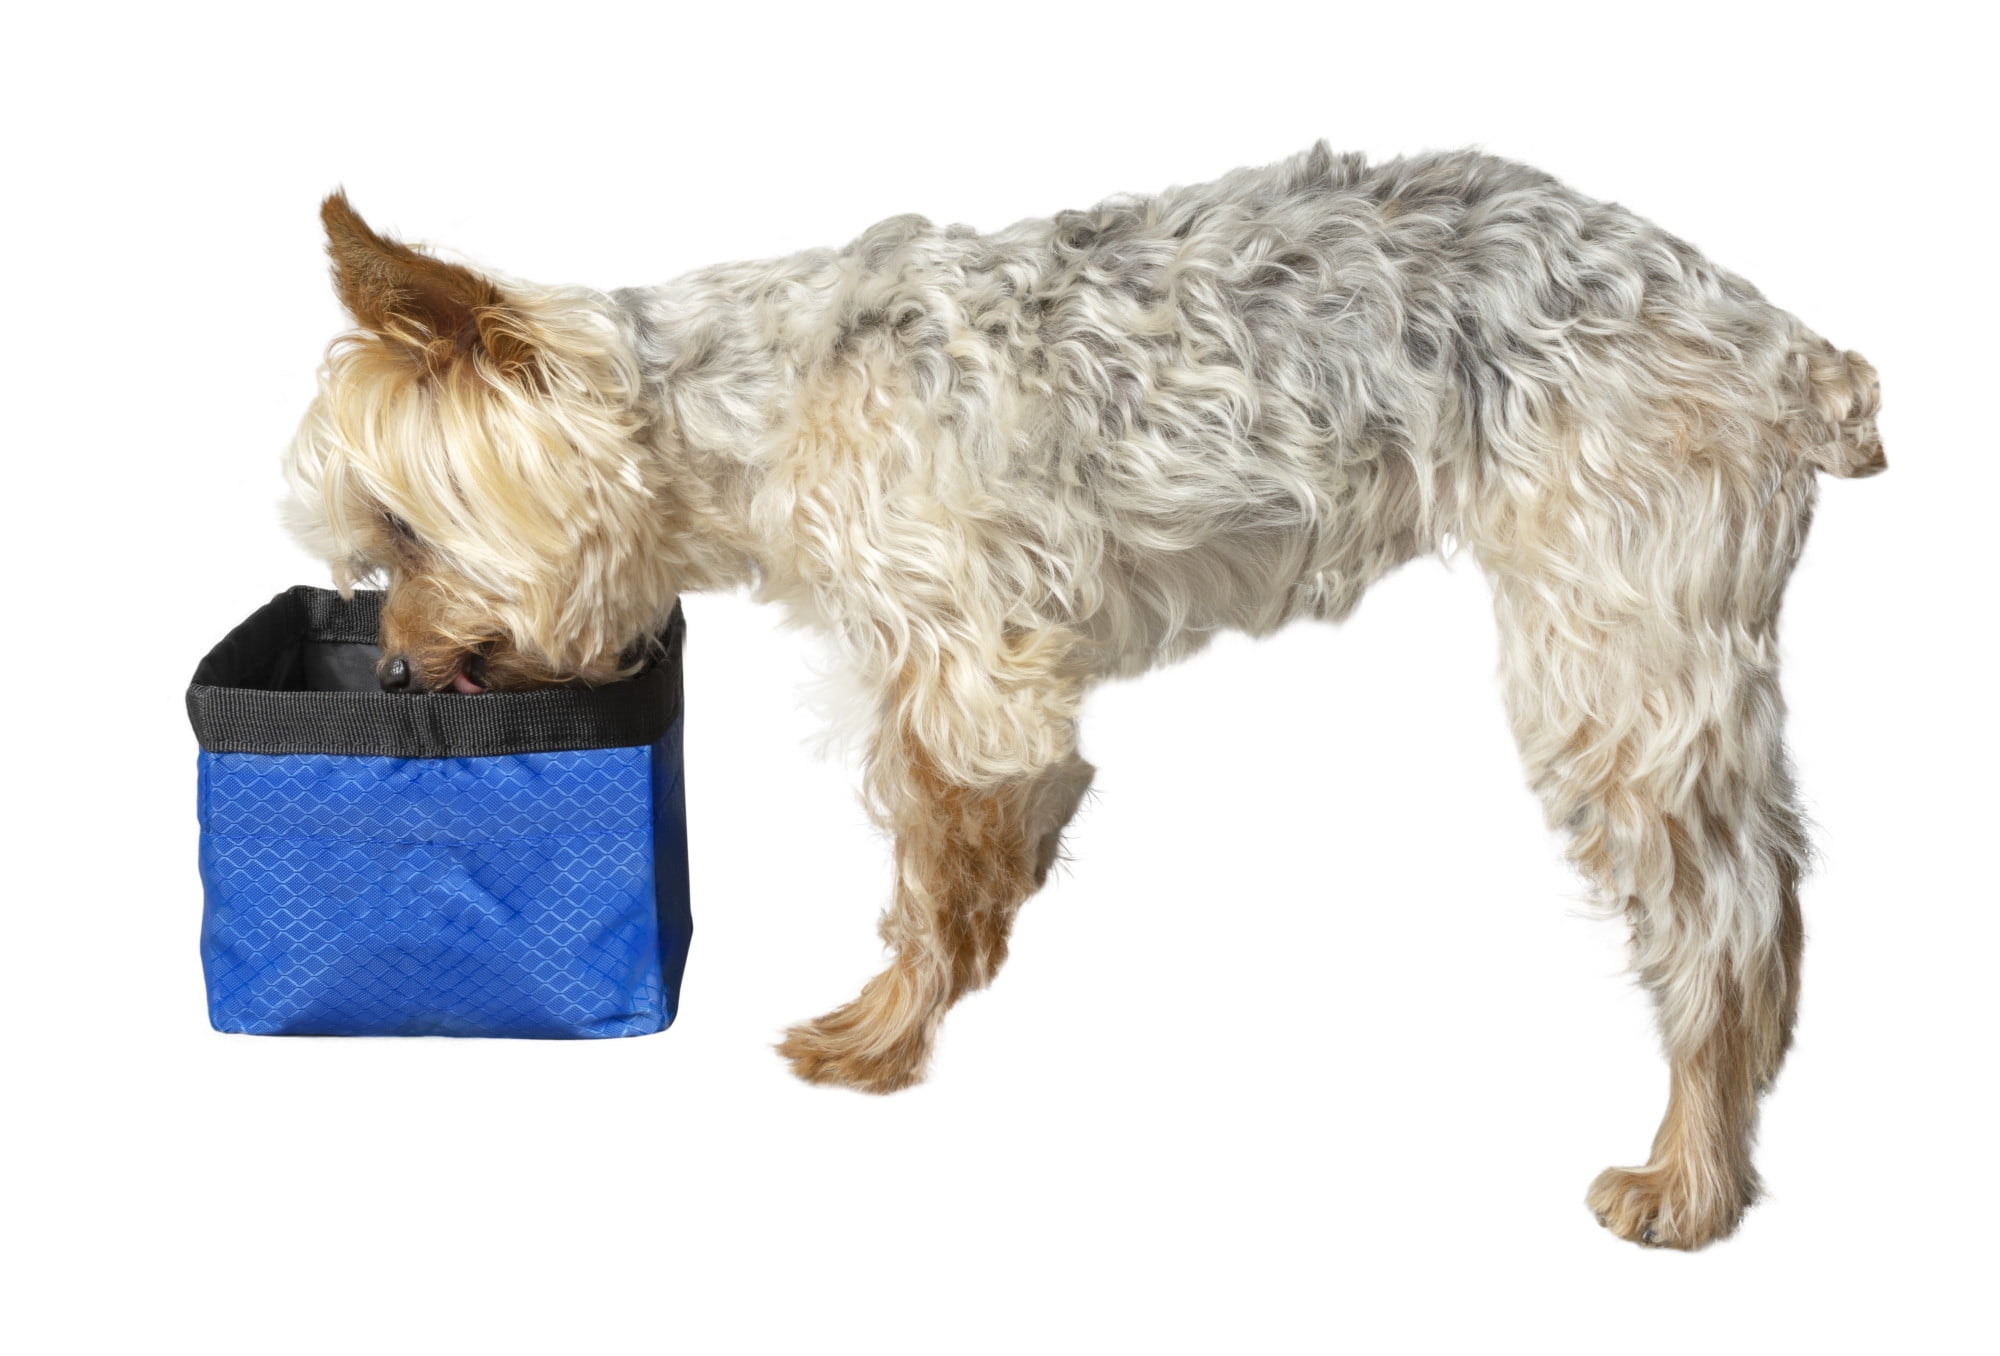 50 Portable Travel Collapsible Pet/Dog Food/Water Bowls SMALL 